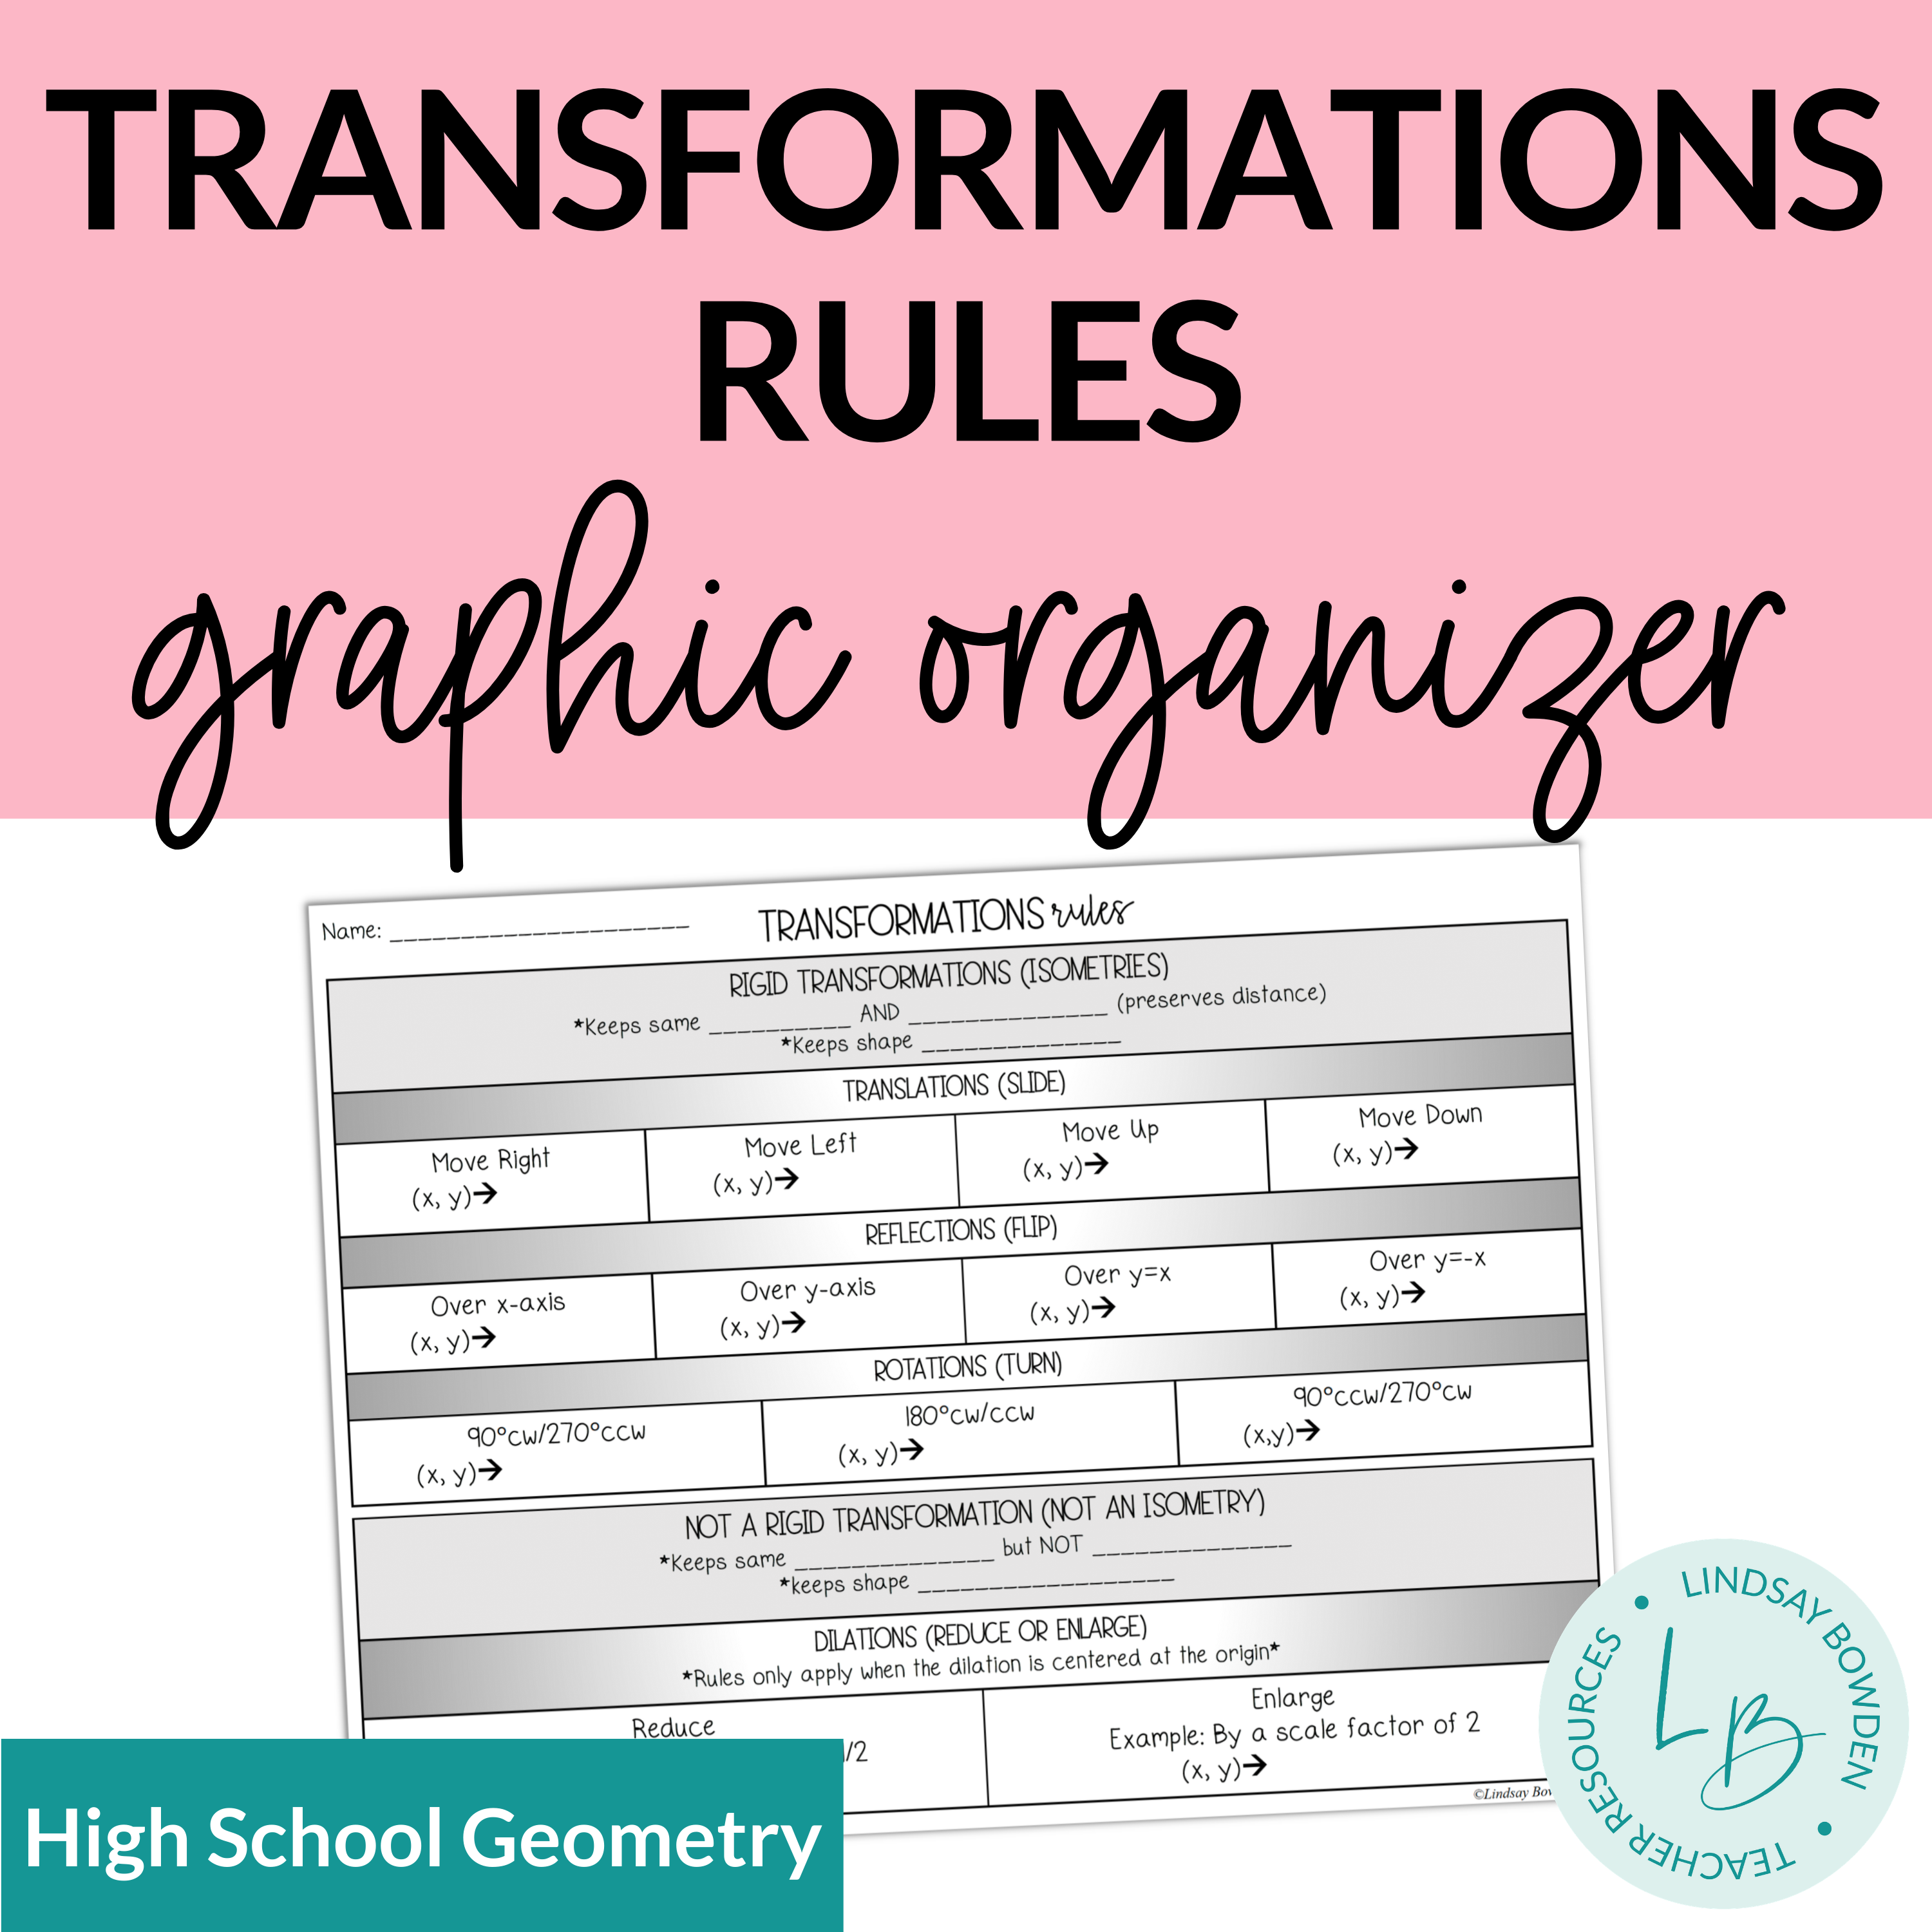 Transformations Rules Graphic Organizer Lindsay Bowden